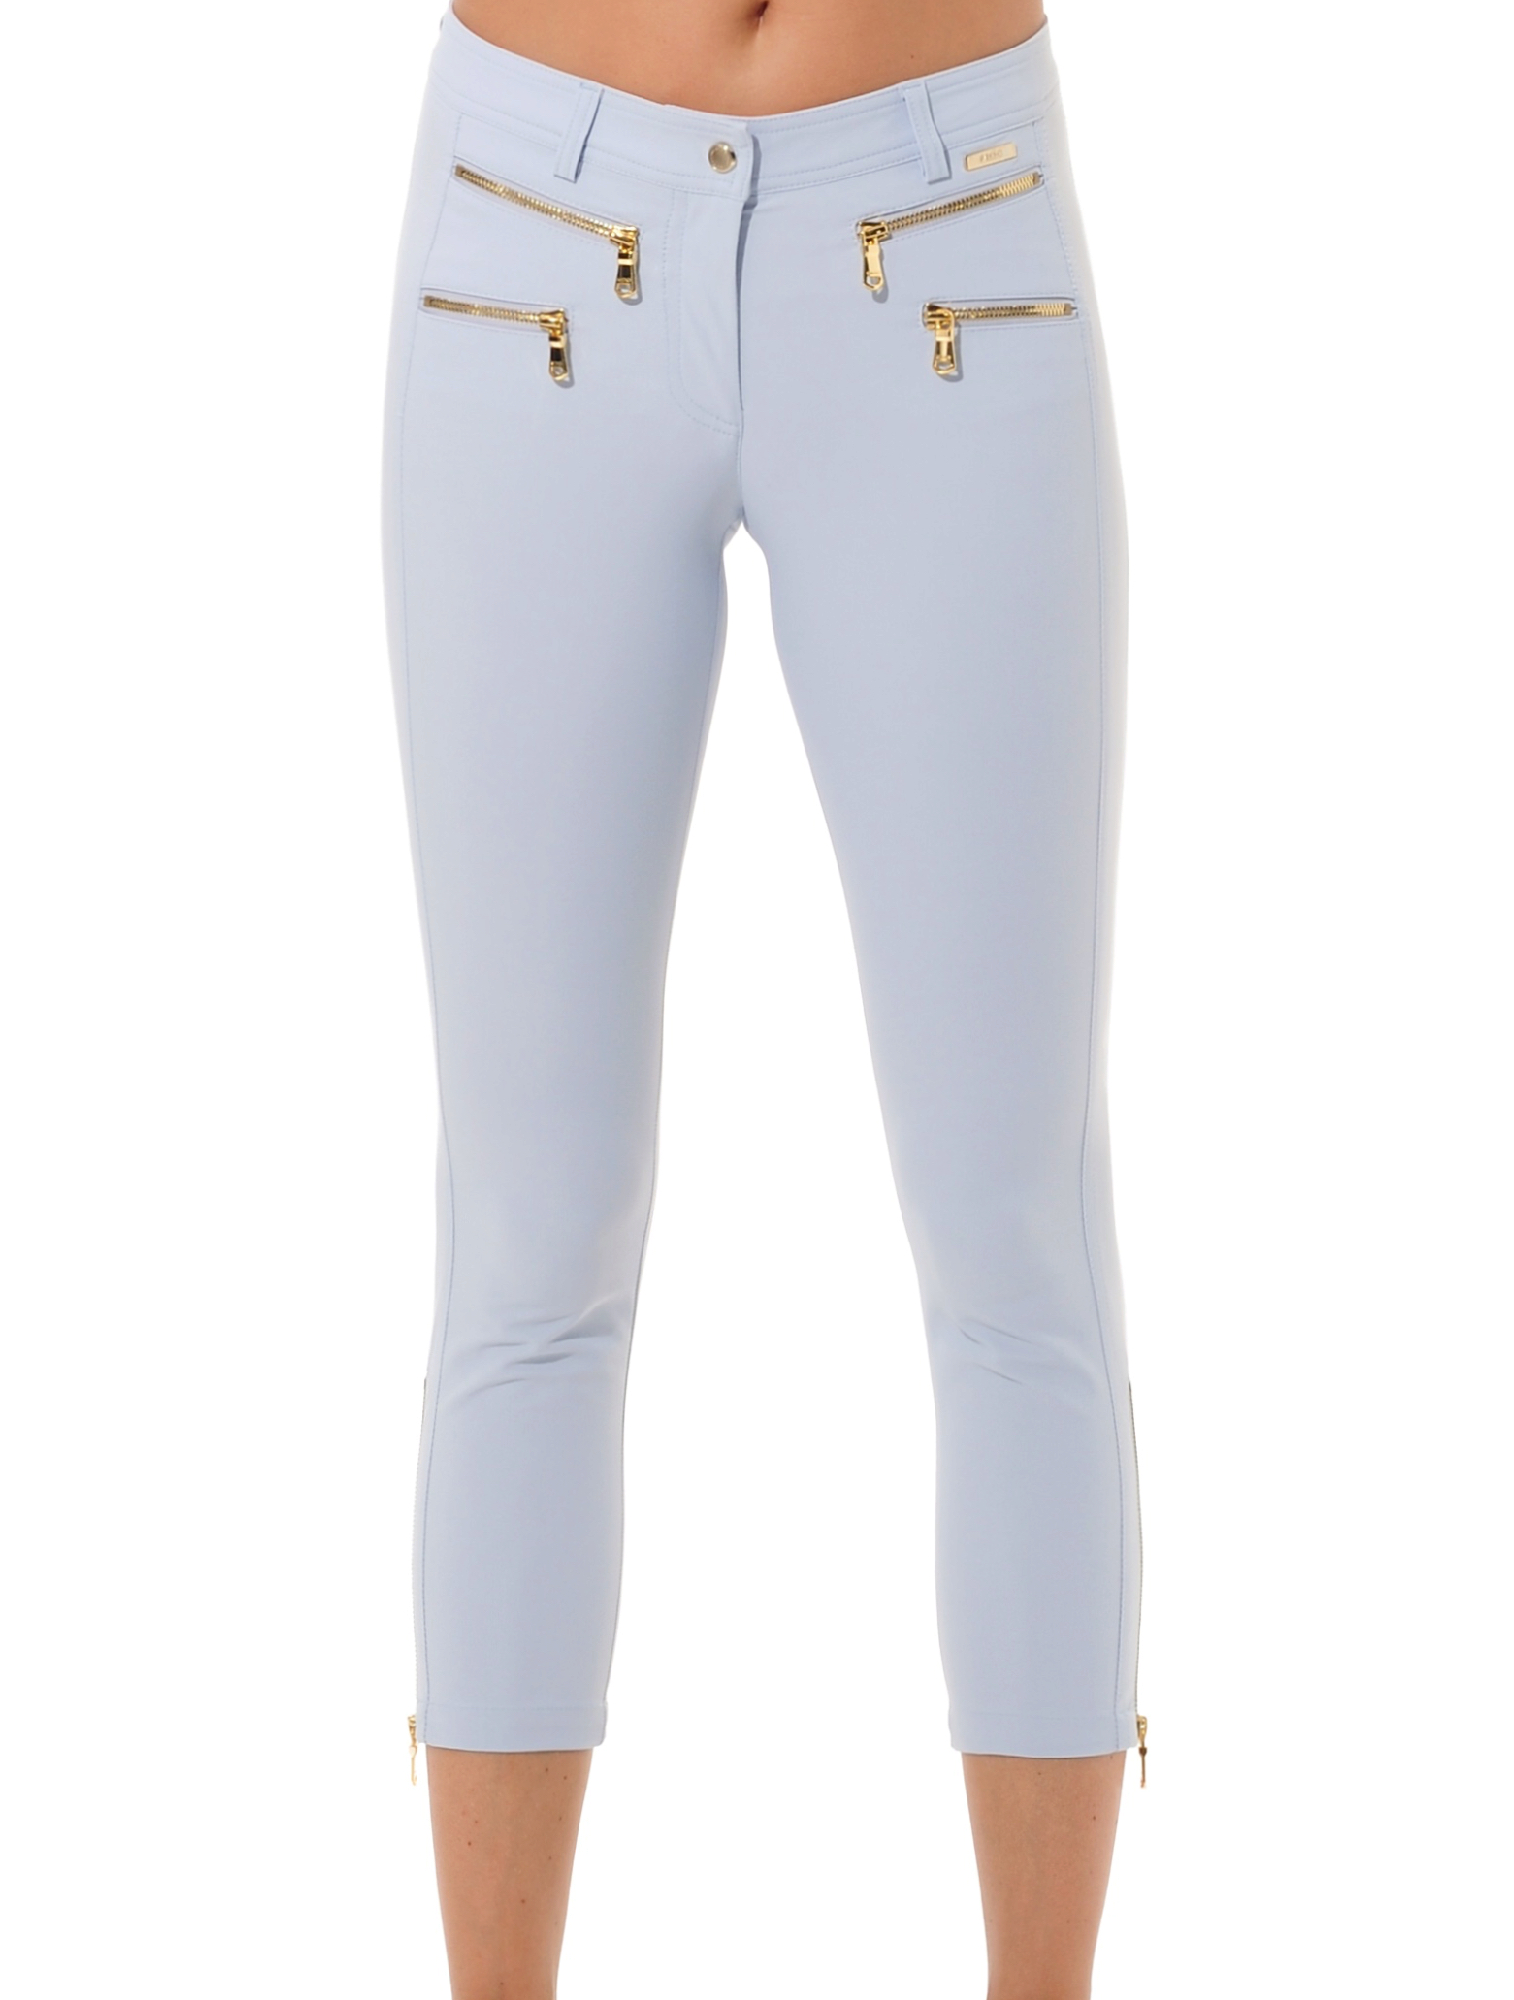 4way Stretch Shiny Gold Double Zip Cropped Pants cloud